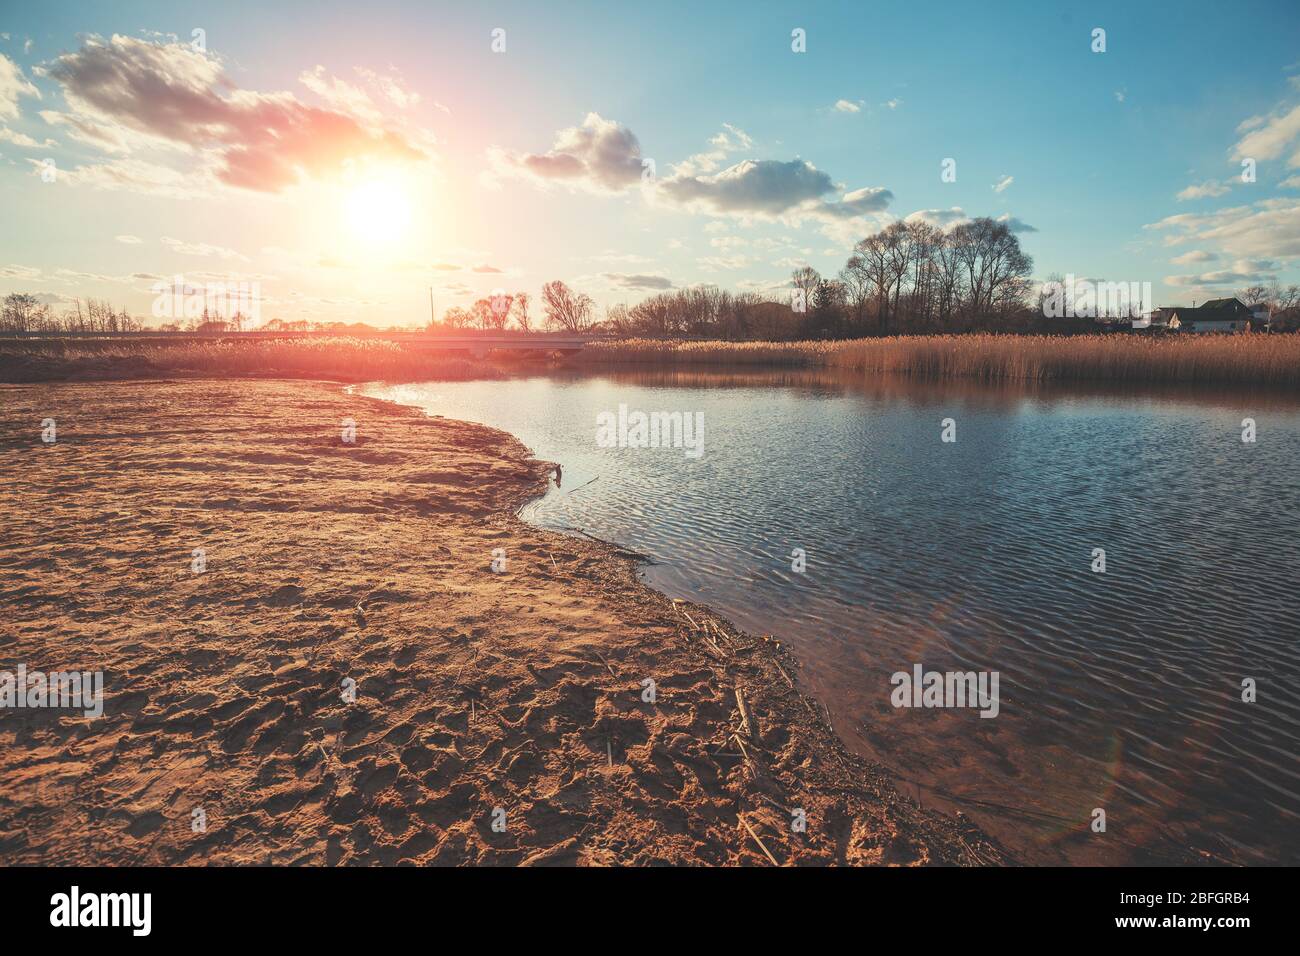 View of the river on the meadow in evening at sunset light. Beautiful nature landscape with the bright evening sky Stock Photo